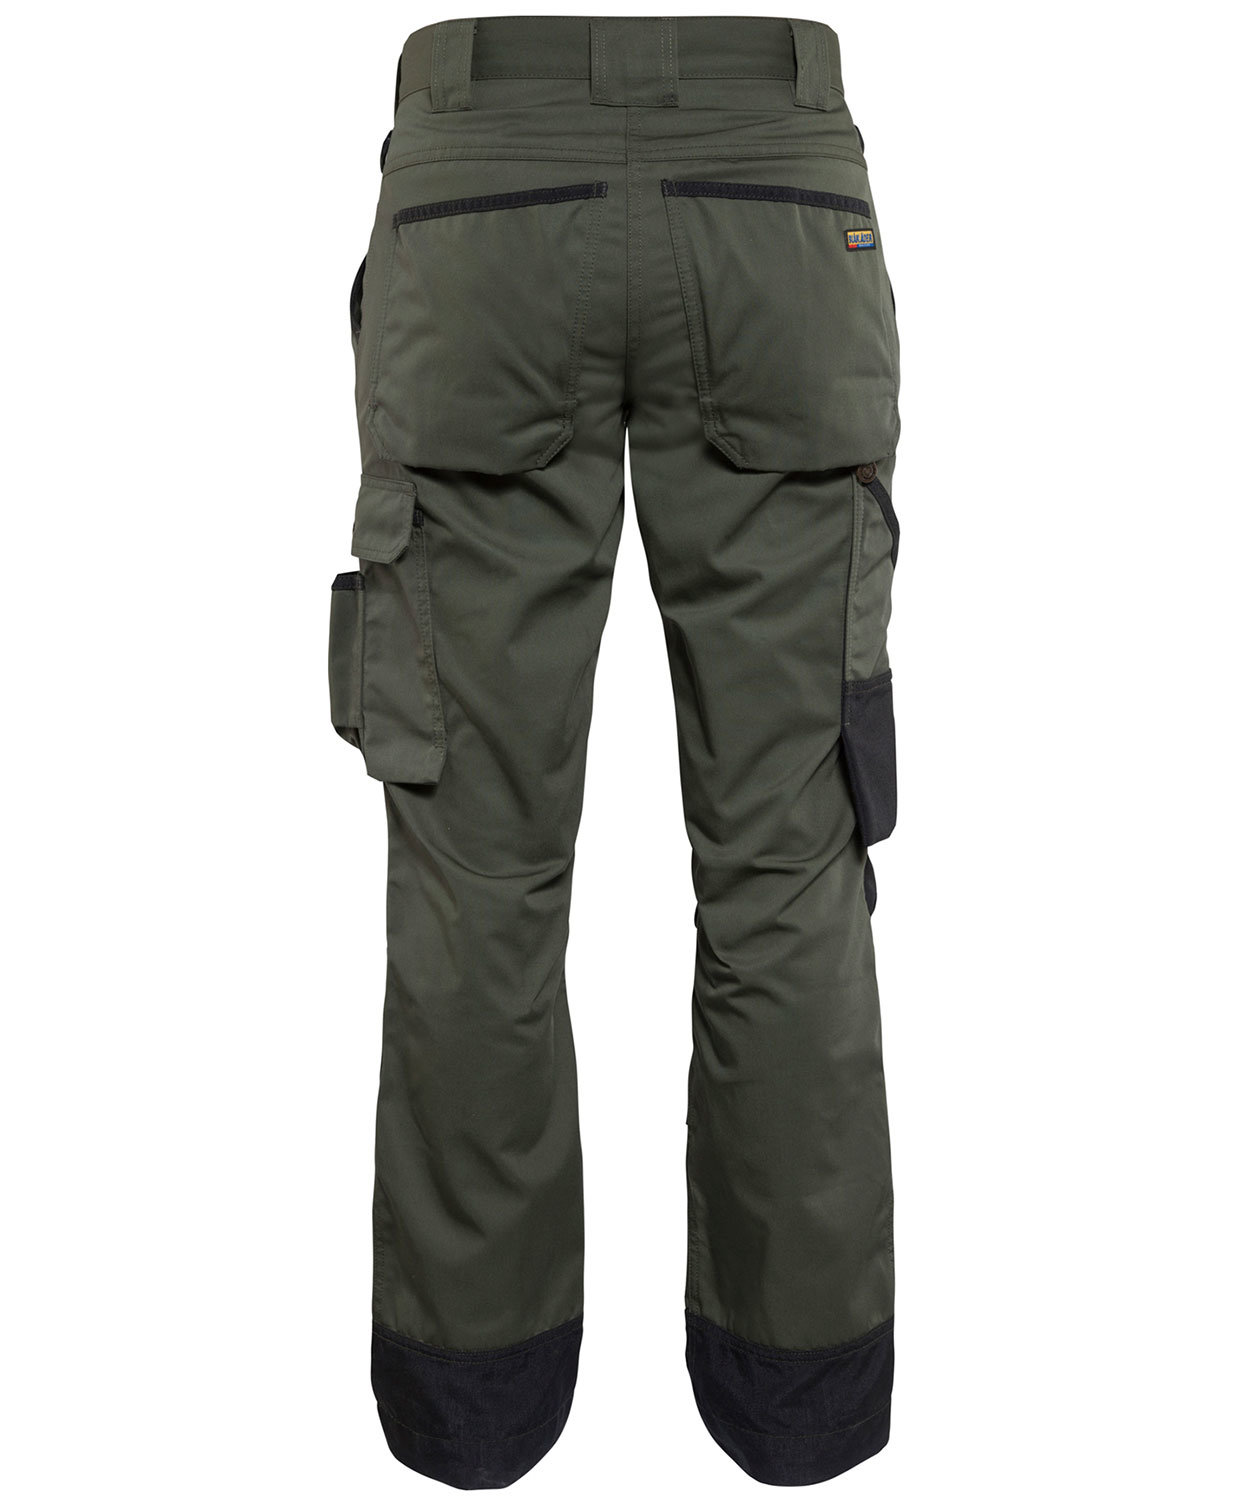 Blaklader 1554 Craftsman Stretch Trousers - Mens (15541860) | Mens trousers,  Trousers, Work wear